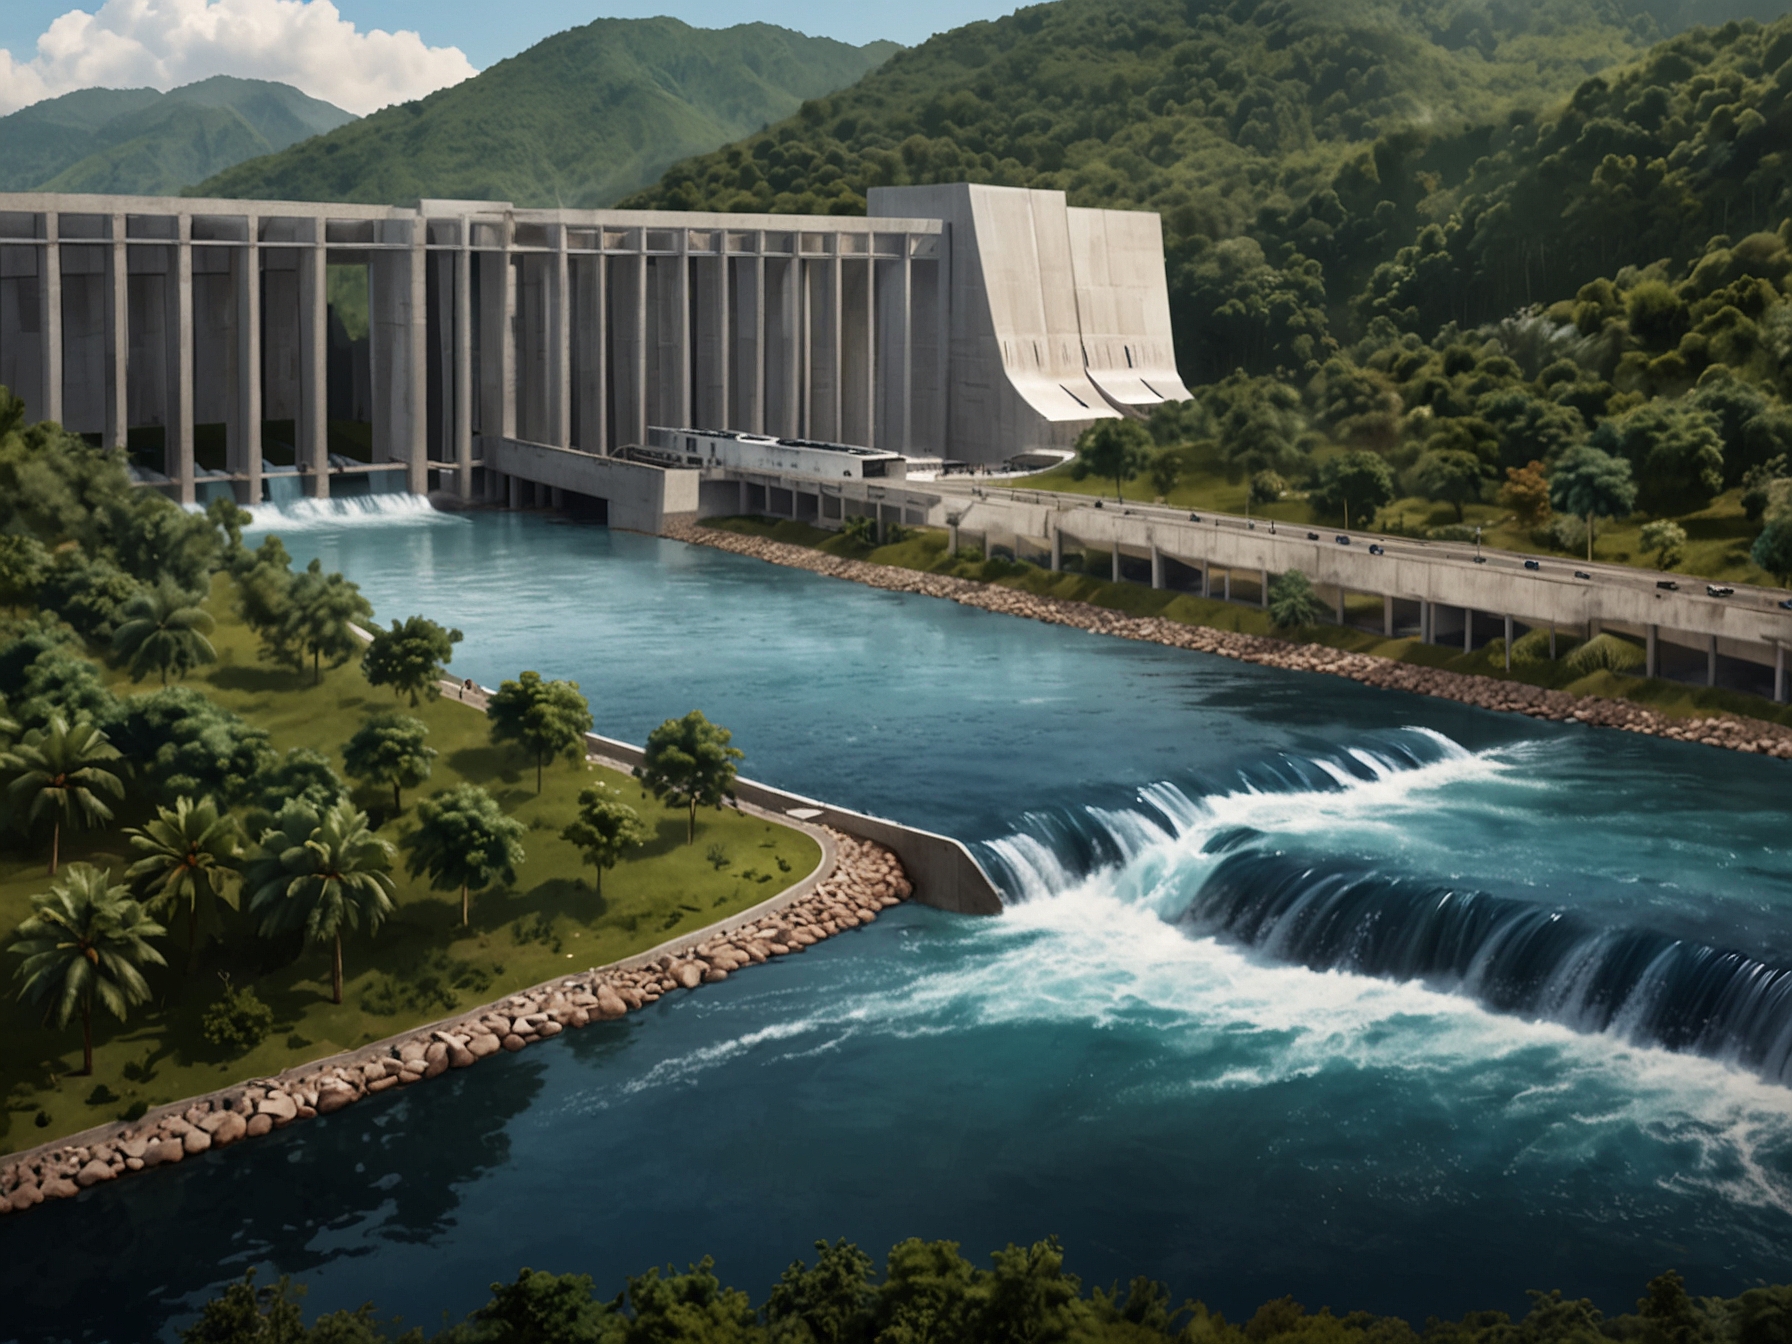 An artist's rendering of the P4.8 billion hydroelectric plant by Filinvest, showcasing the sustainable infrastructure integrated into the natural landscape to generate renewable energy.